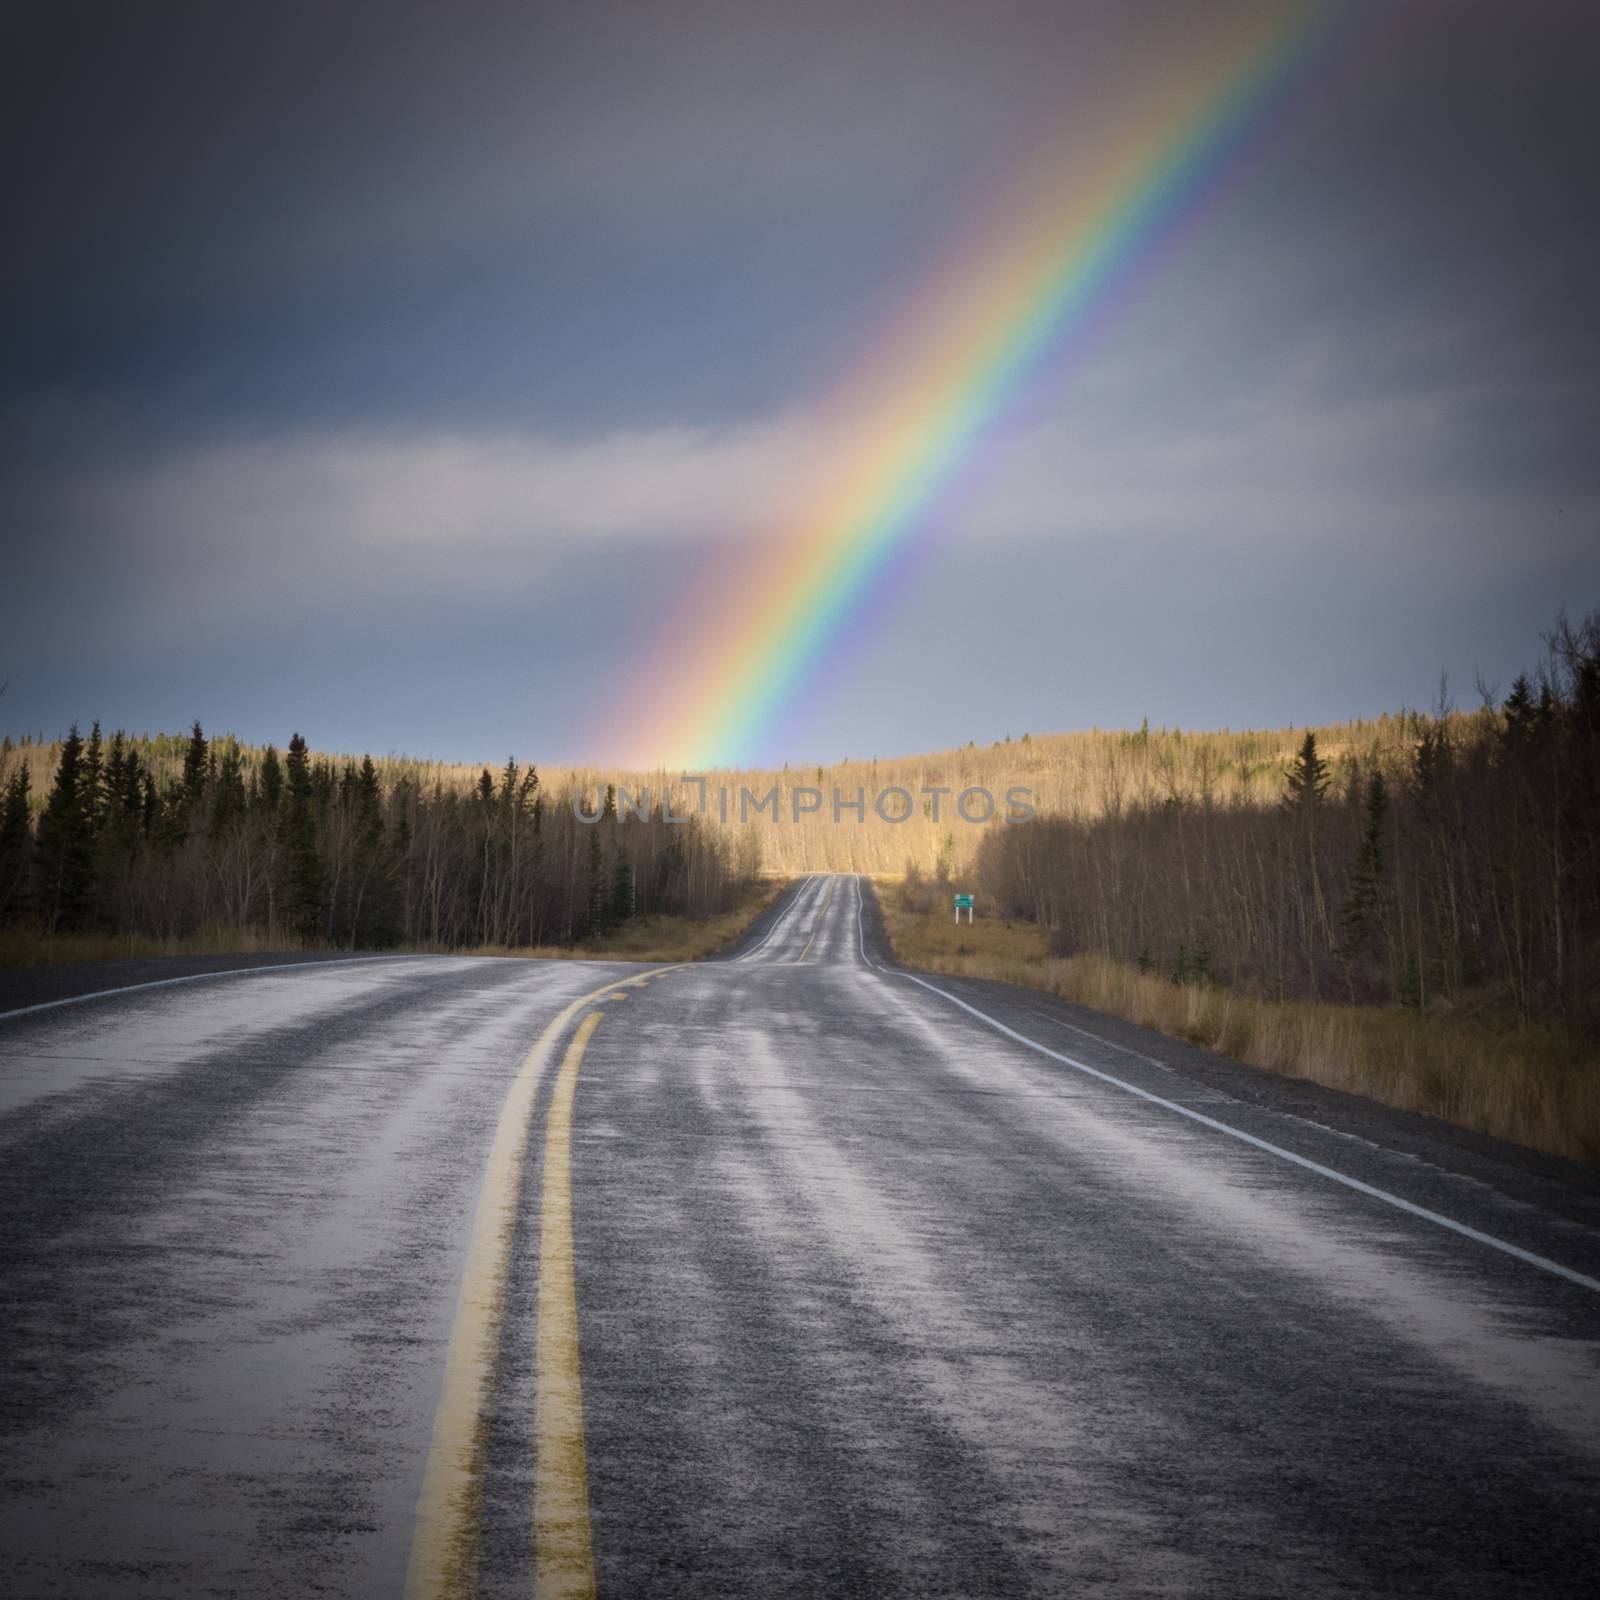 Wet asphalt road leading to colourful rainbow over late fall forested landscape after rain in Yukon Territory, Canada